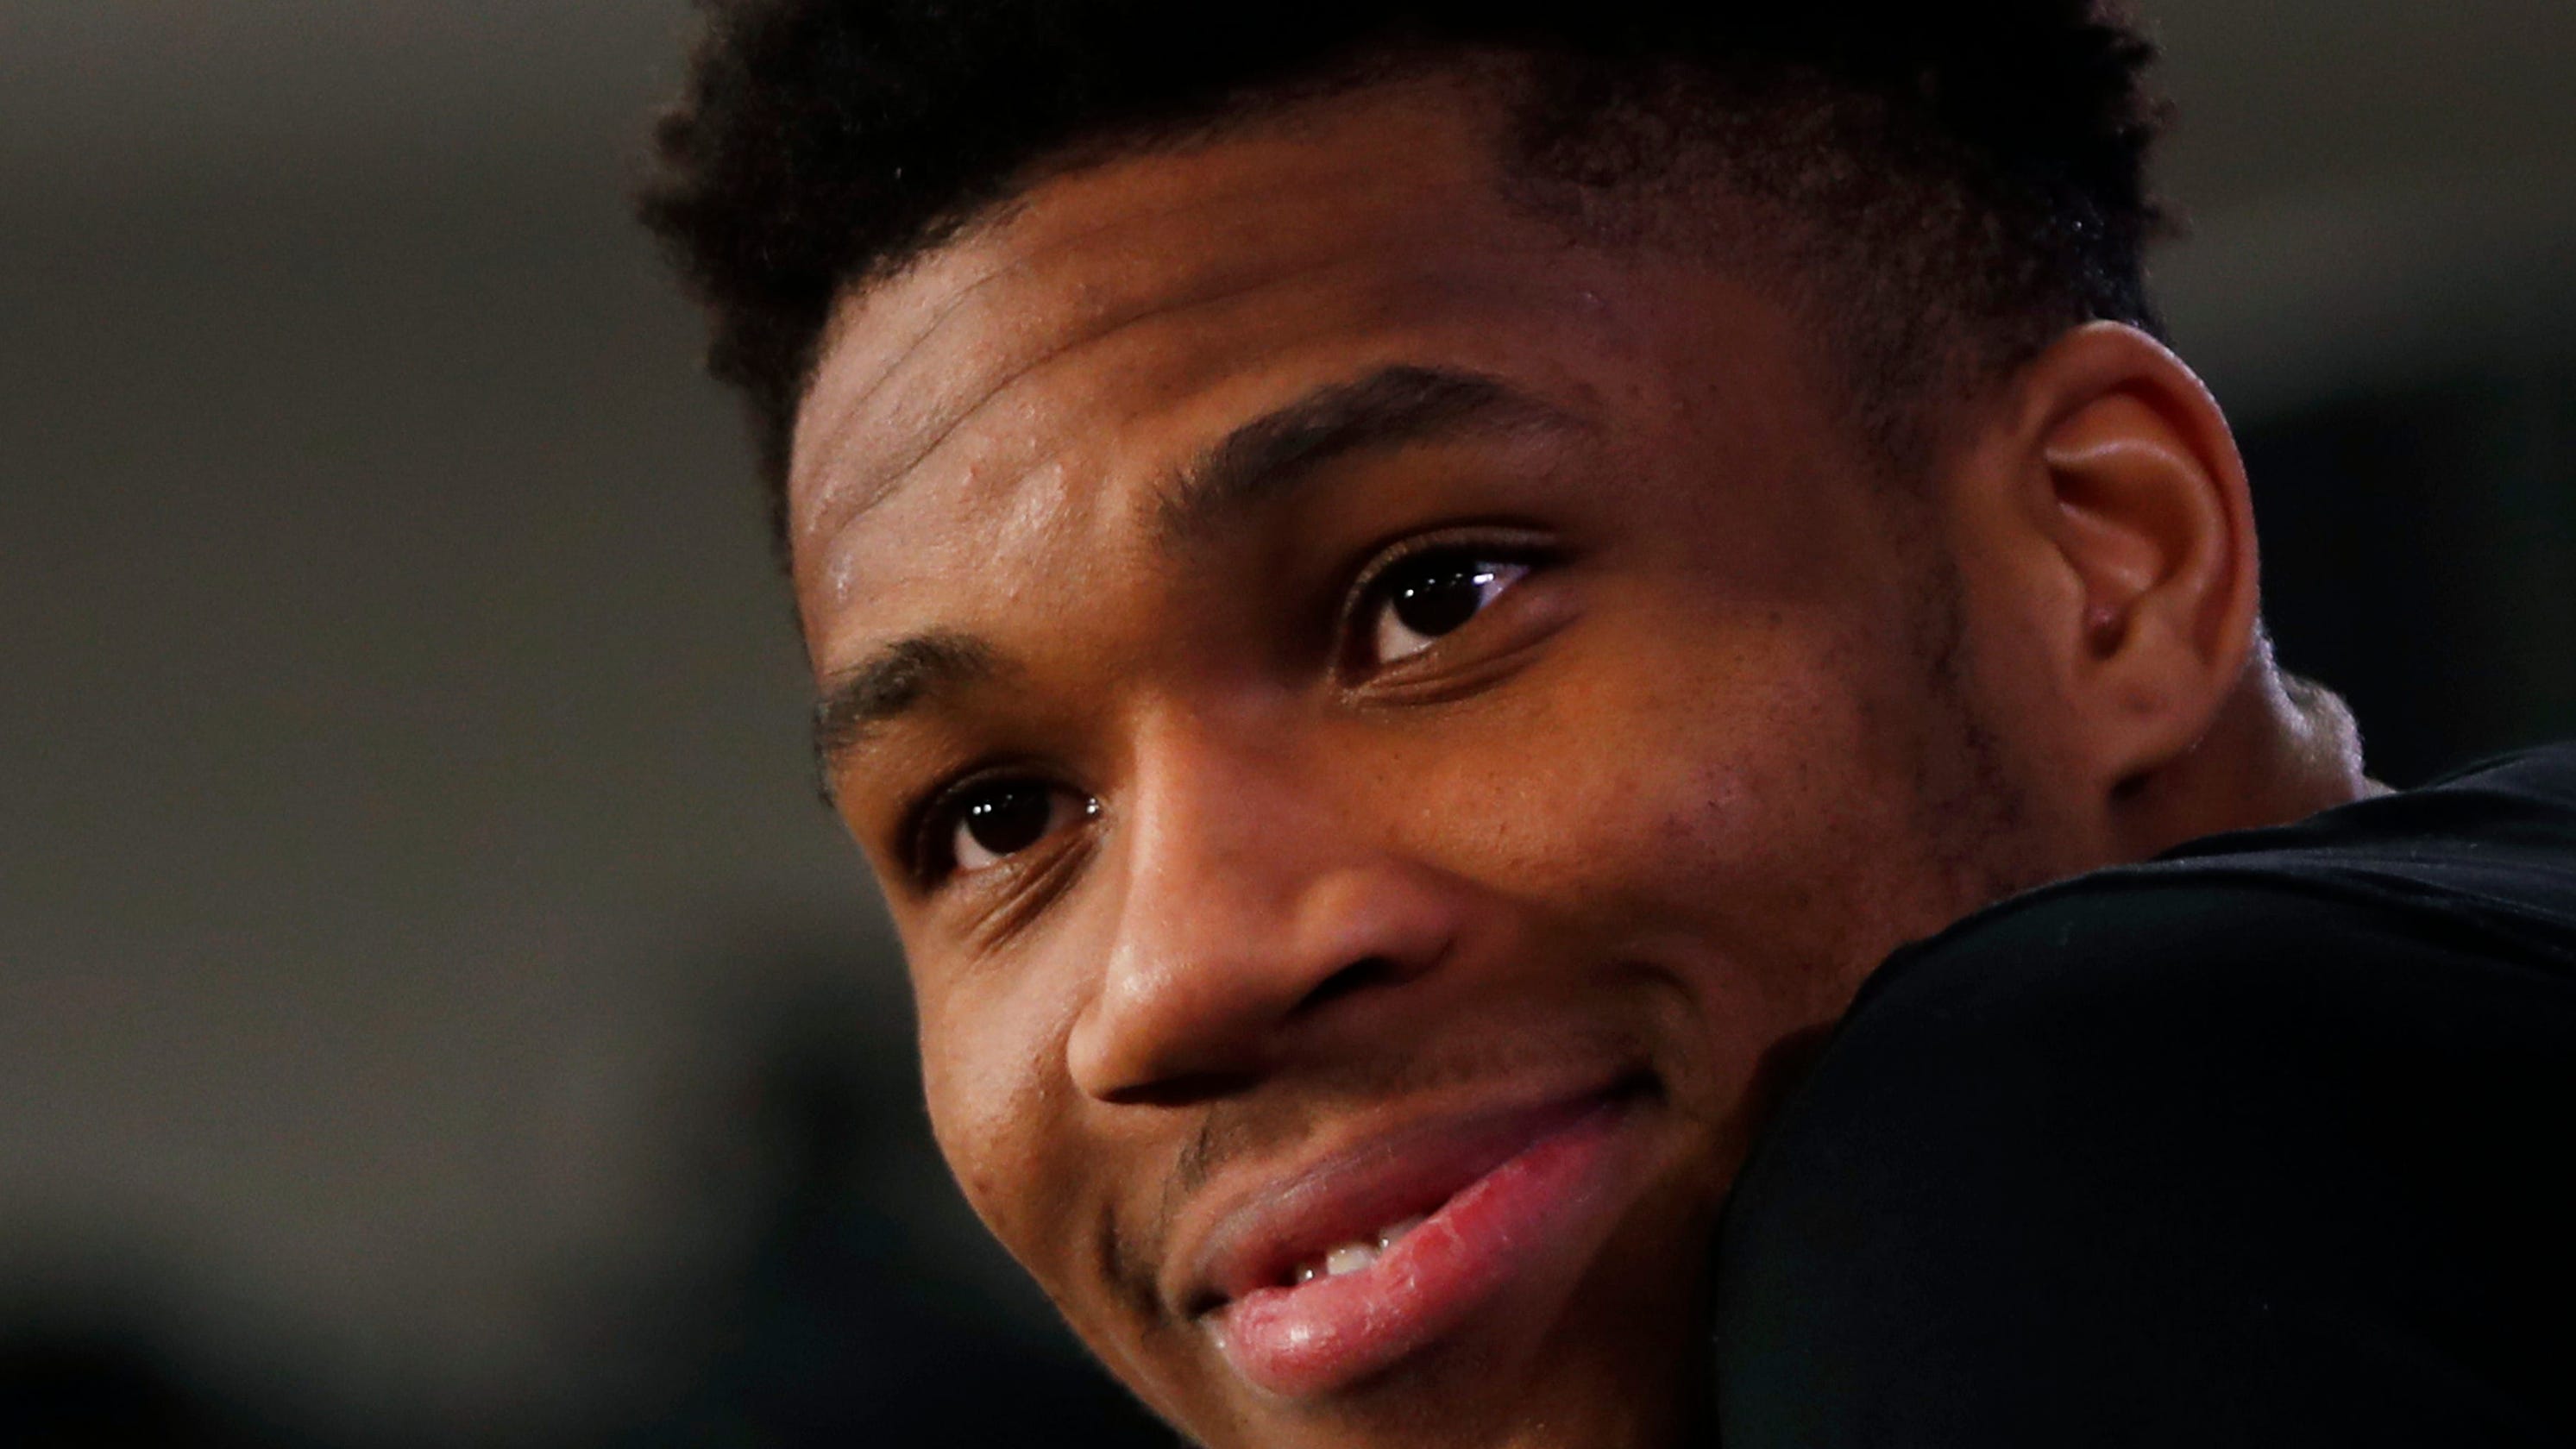 Flipboard: Giannis Antetokounmpo Announced The Birth Of His Son, Liam, On Twitter2986 x 1680